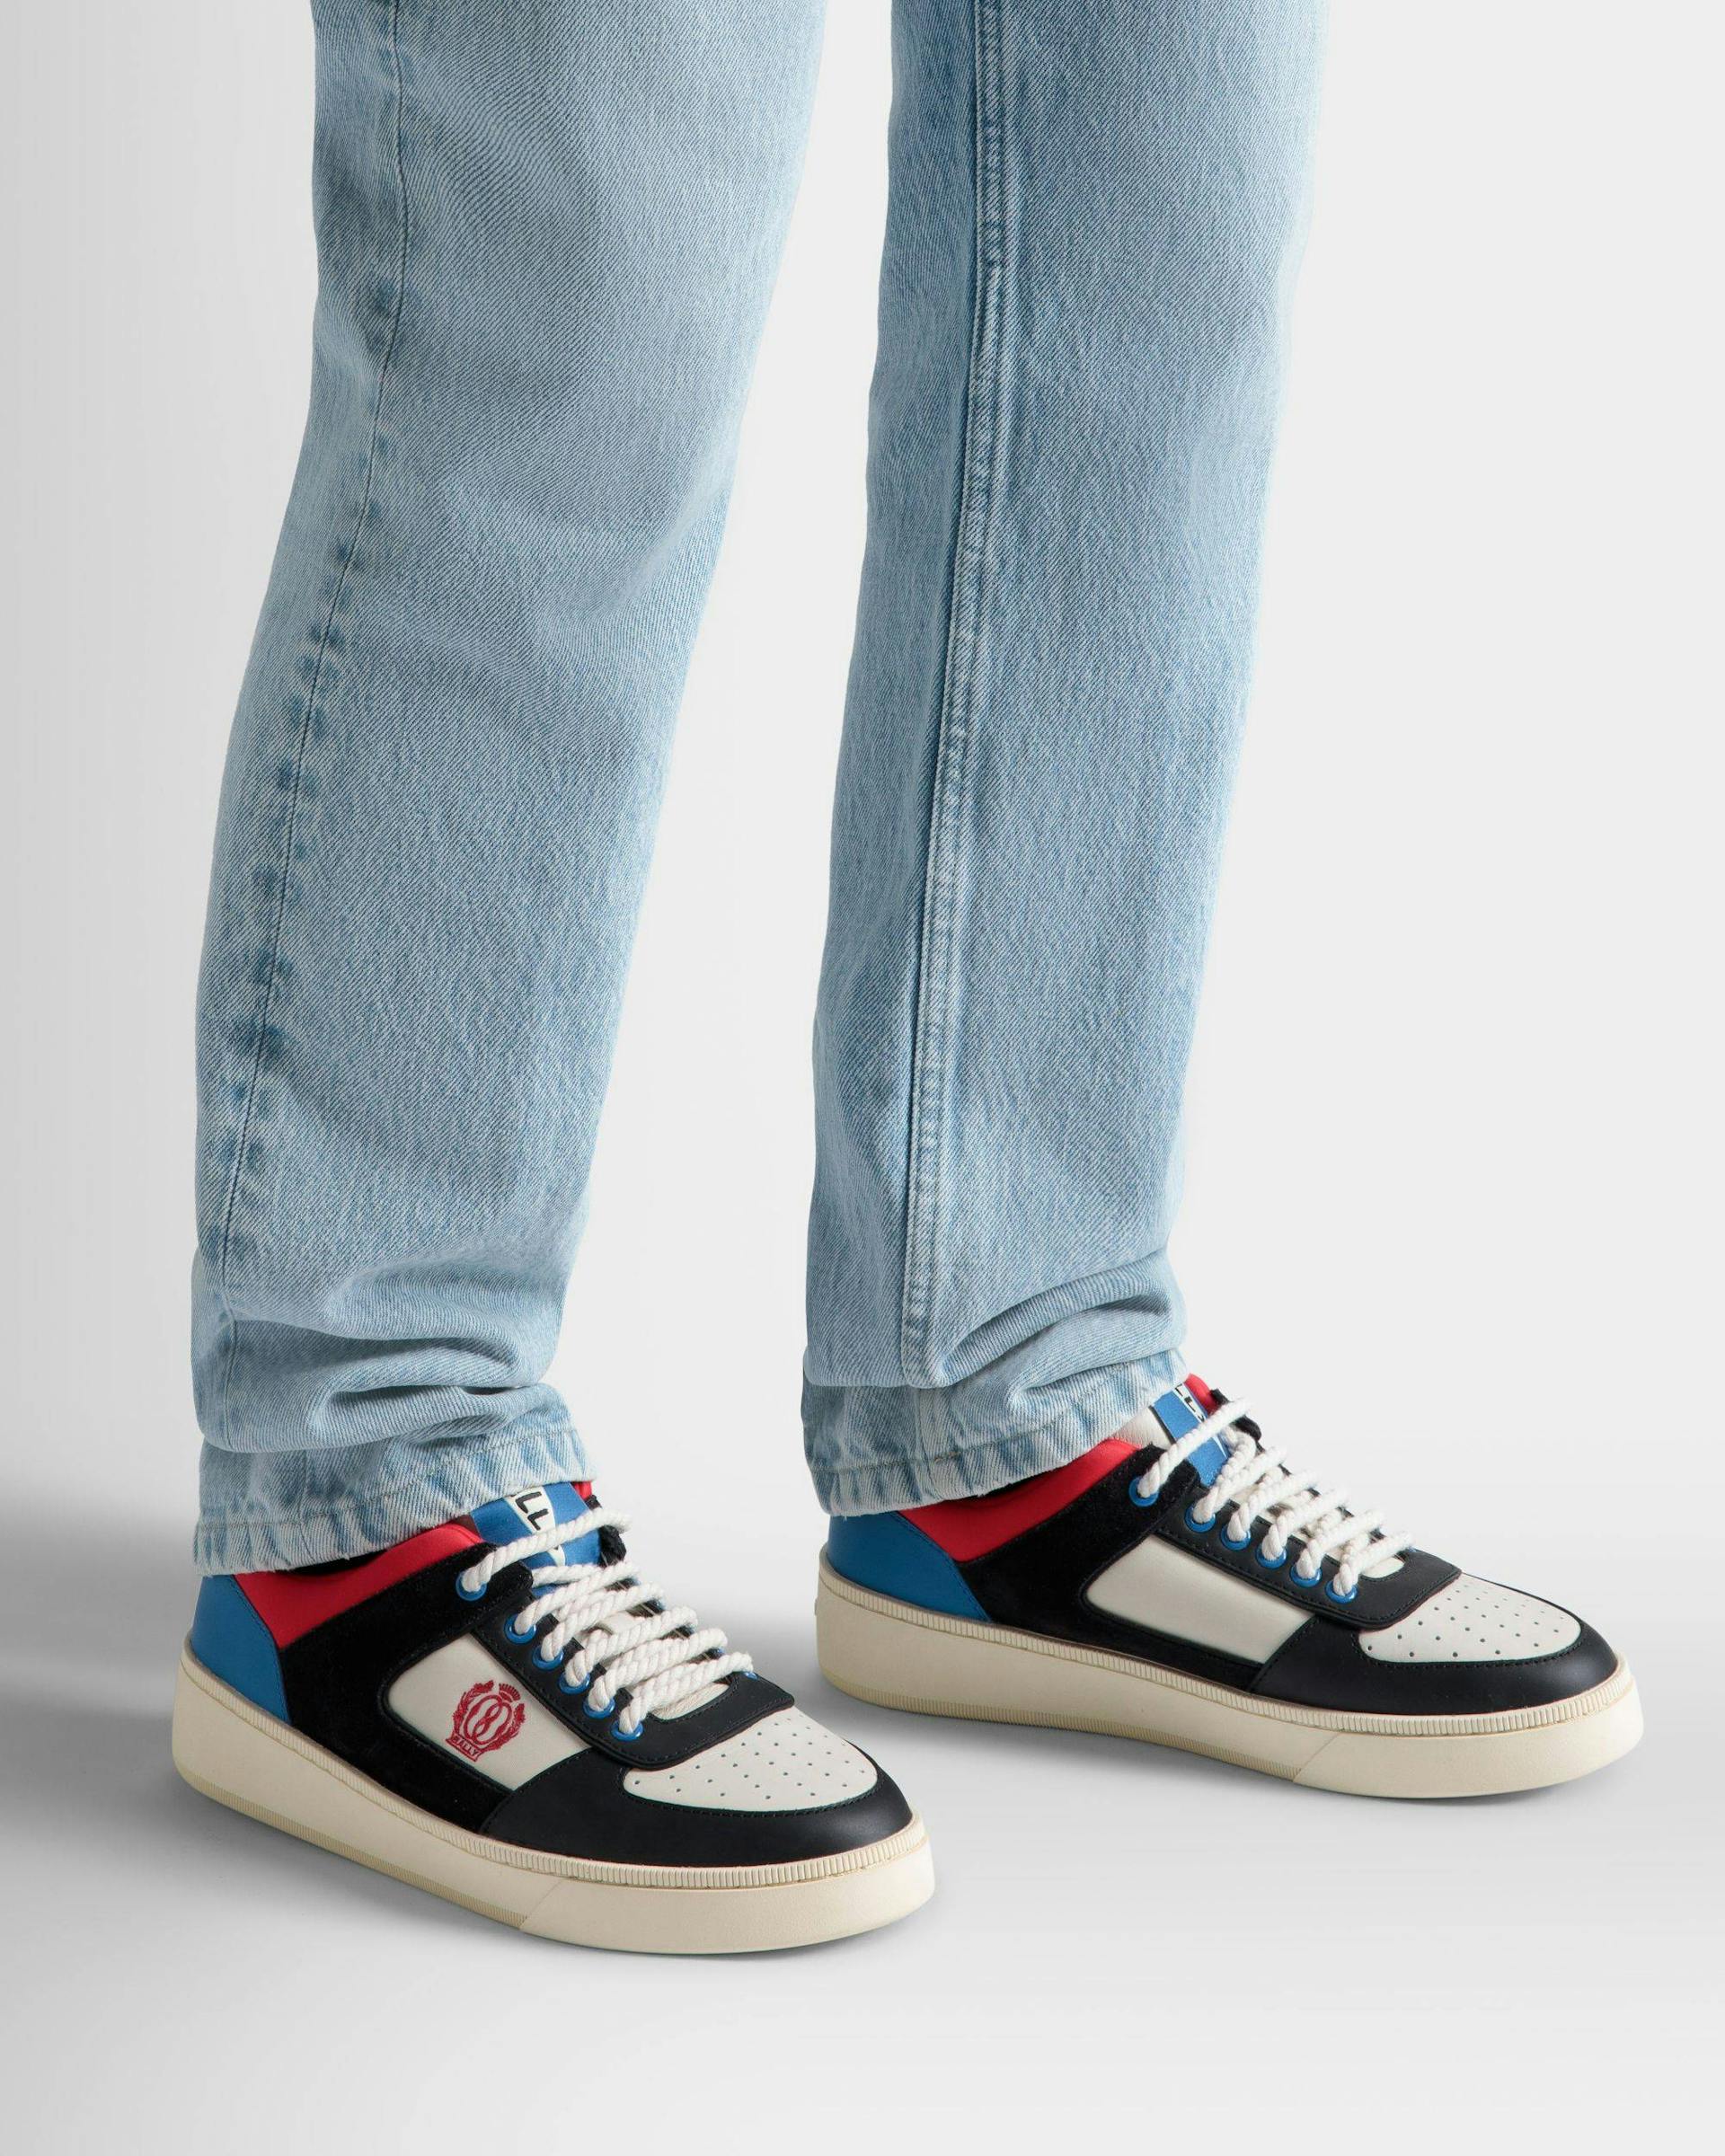 Men's Raise Sneaker In Multicolor Leather | Bally | On Model Close Up